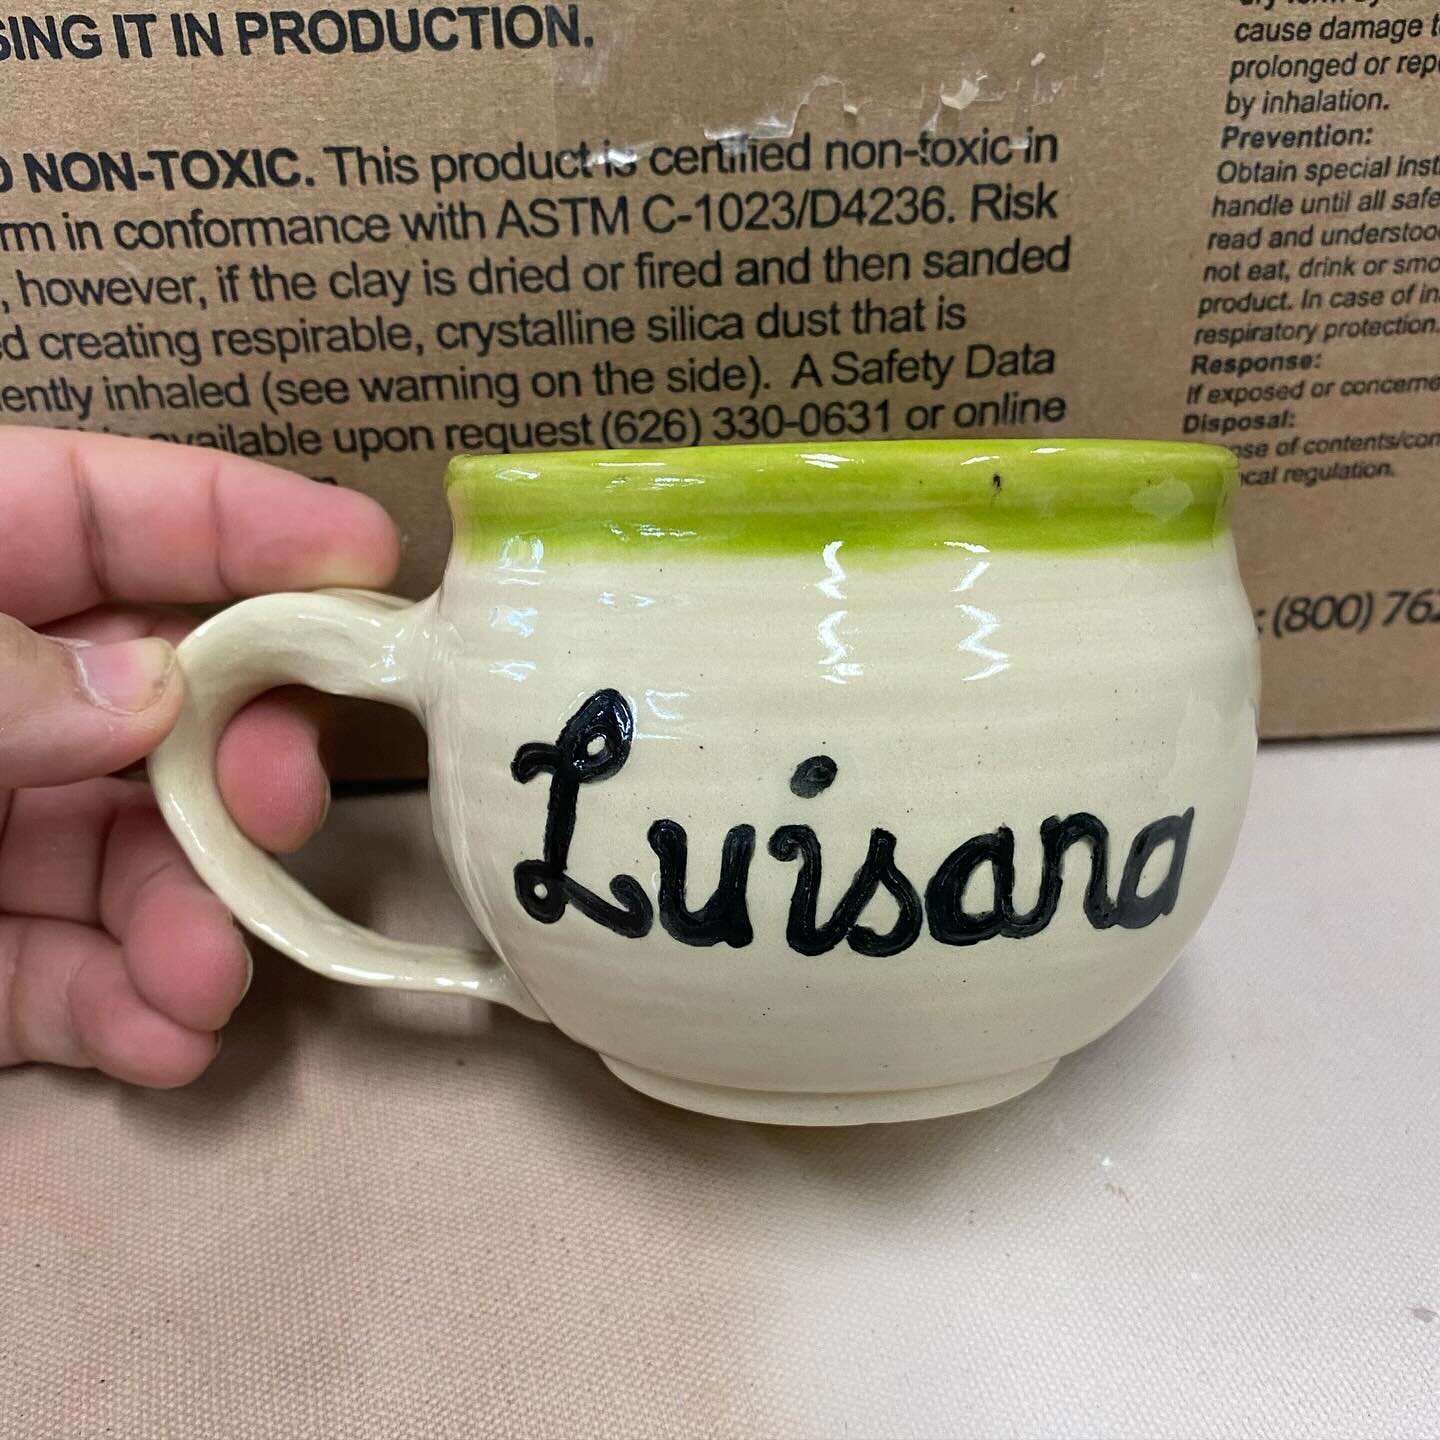 🌻I was asked to do a custom mug and it turned out to be a success! The customer wanted an oversized mug shape with her name and lined with her favorite color. 

Starting January 1st, I will have my commissions open. If there is an object I make that